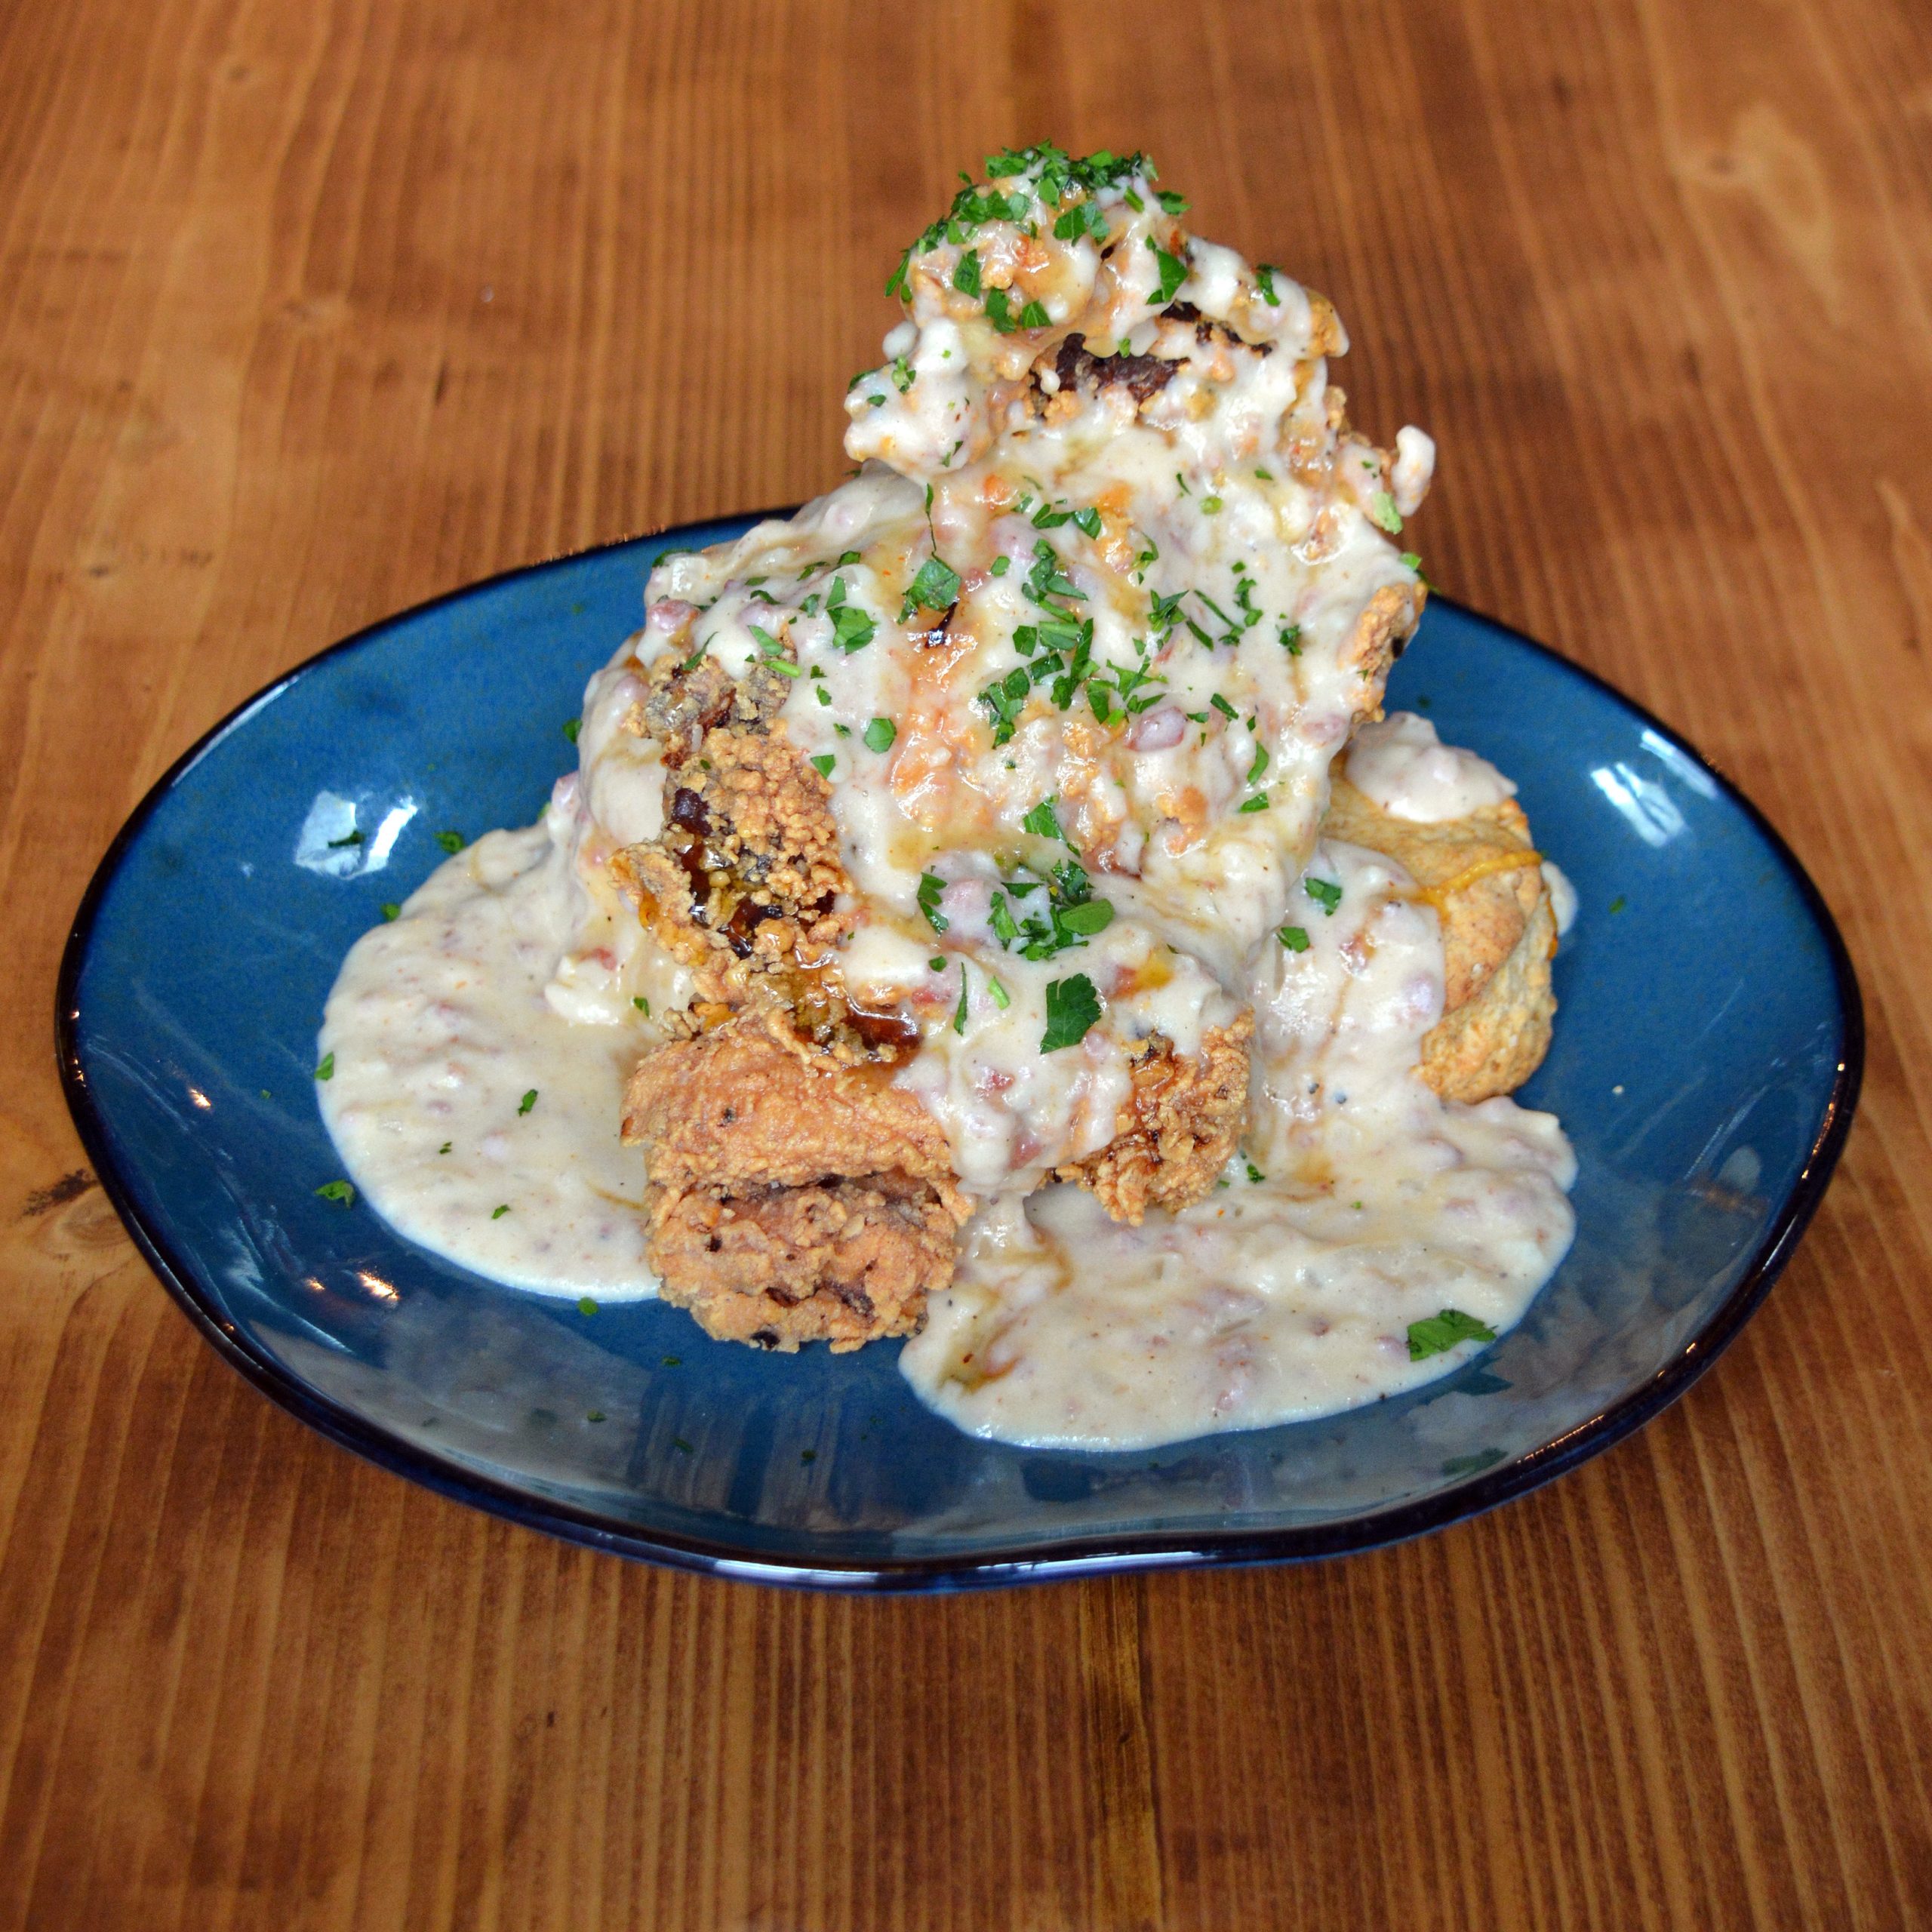 Fried Chicken topped with Gravy